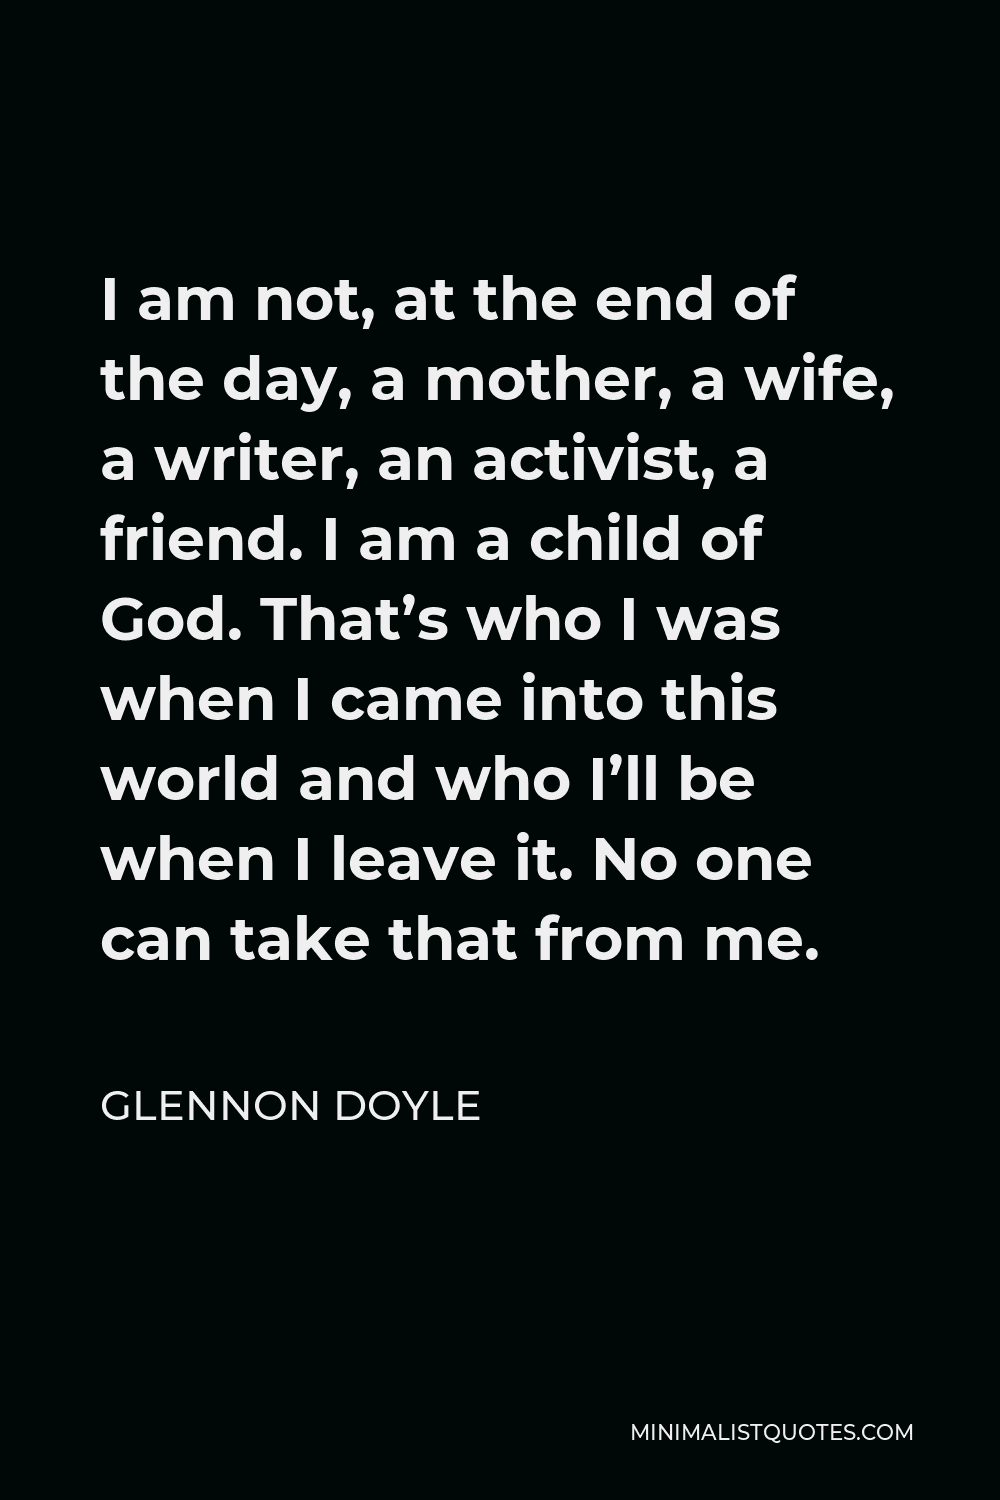 Glennon Doyle Quote - I am not, at the end of the day, a mother, a wife, a writer, an activist, a friend. I am a child of God. That’s who I was when I came into this world and who I’ll be when I leave it. No one can take that from me.